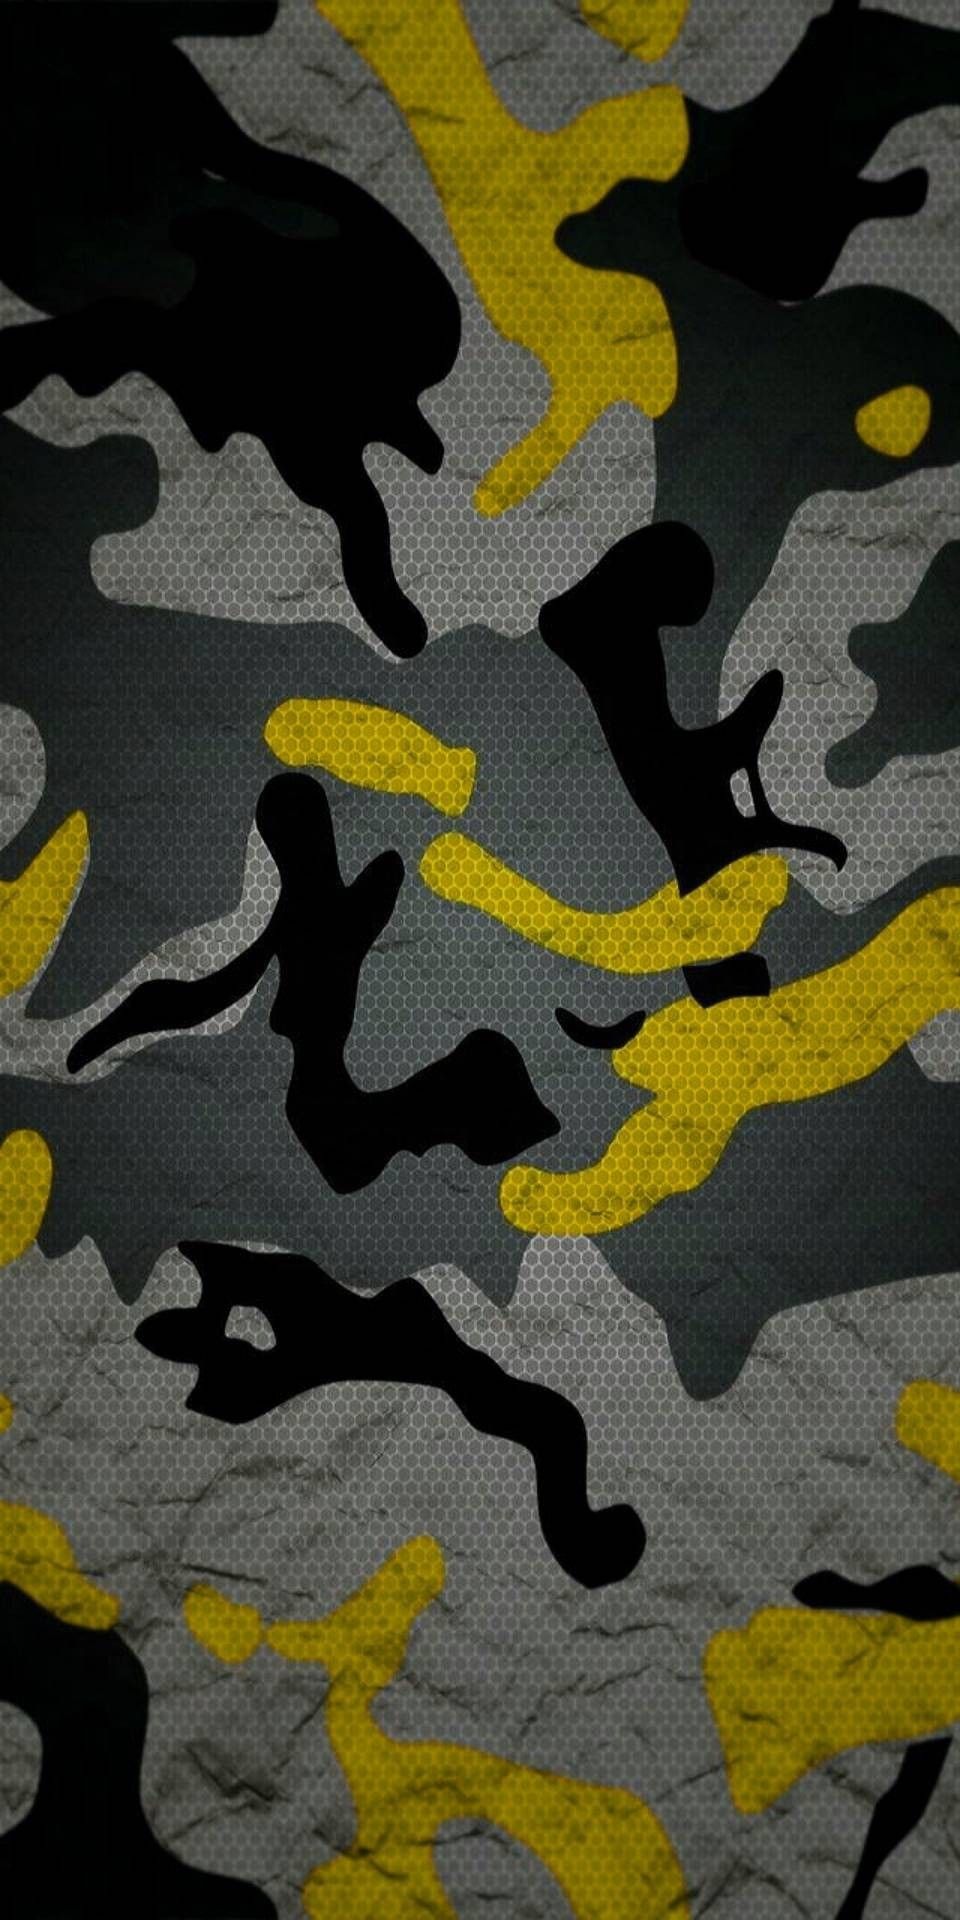 Camo ideas. camo wallpaper, camouflage wallpaper, camouflage patterns